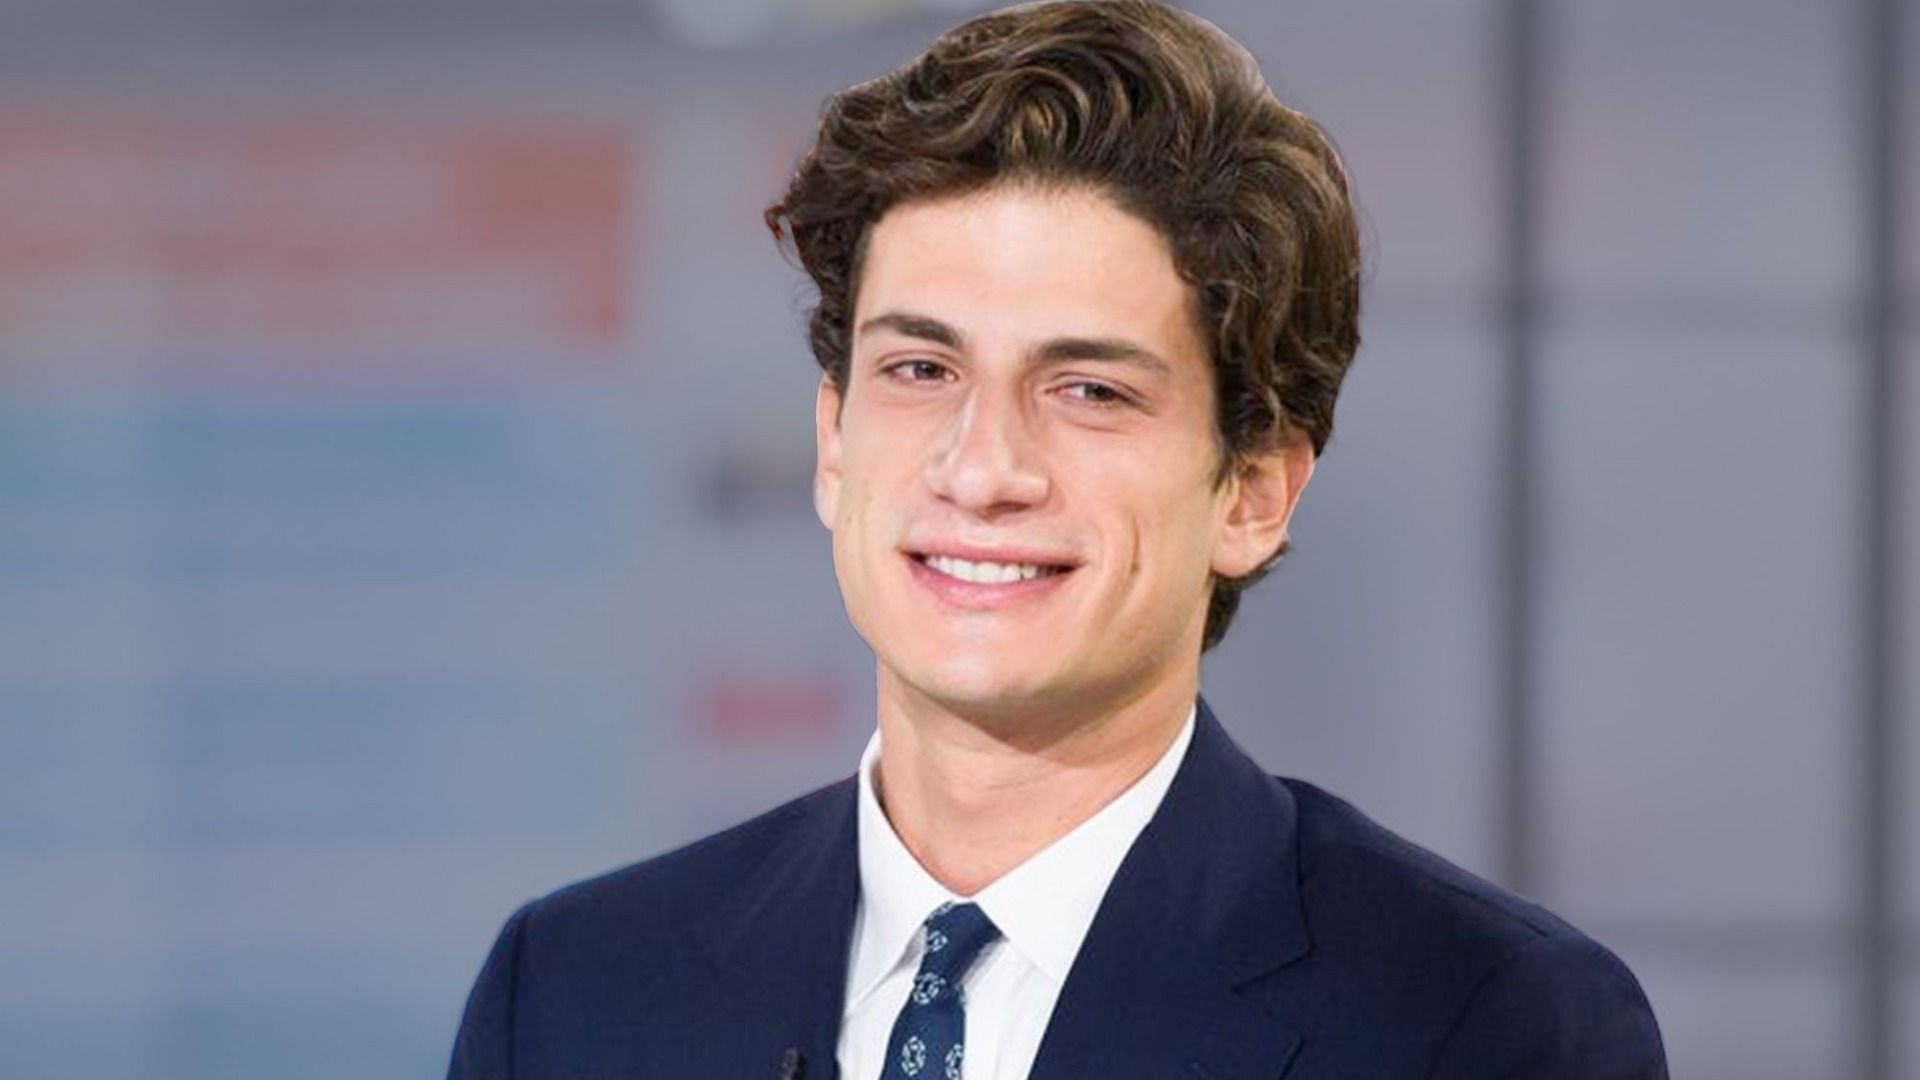 Jack Schlossberg recently graduated from prestigious Harvard Law and Harvard Business School (Image via Getty Images/ Nathan Congleton)